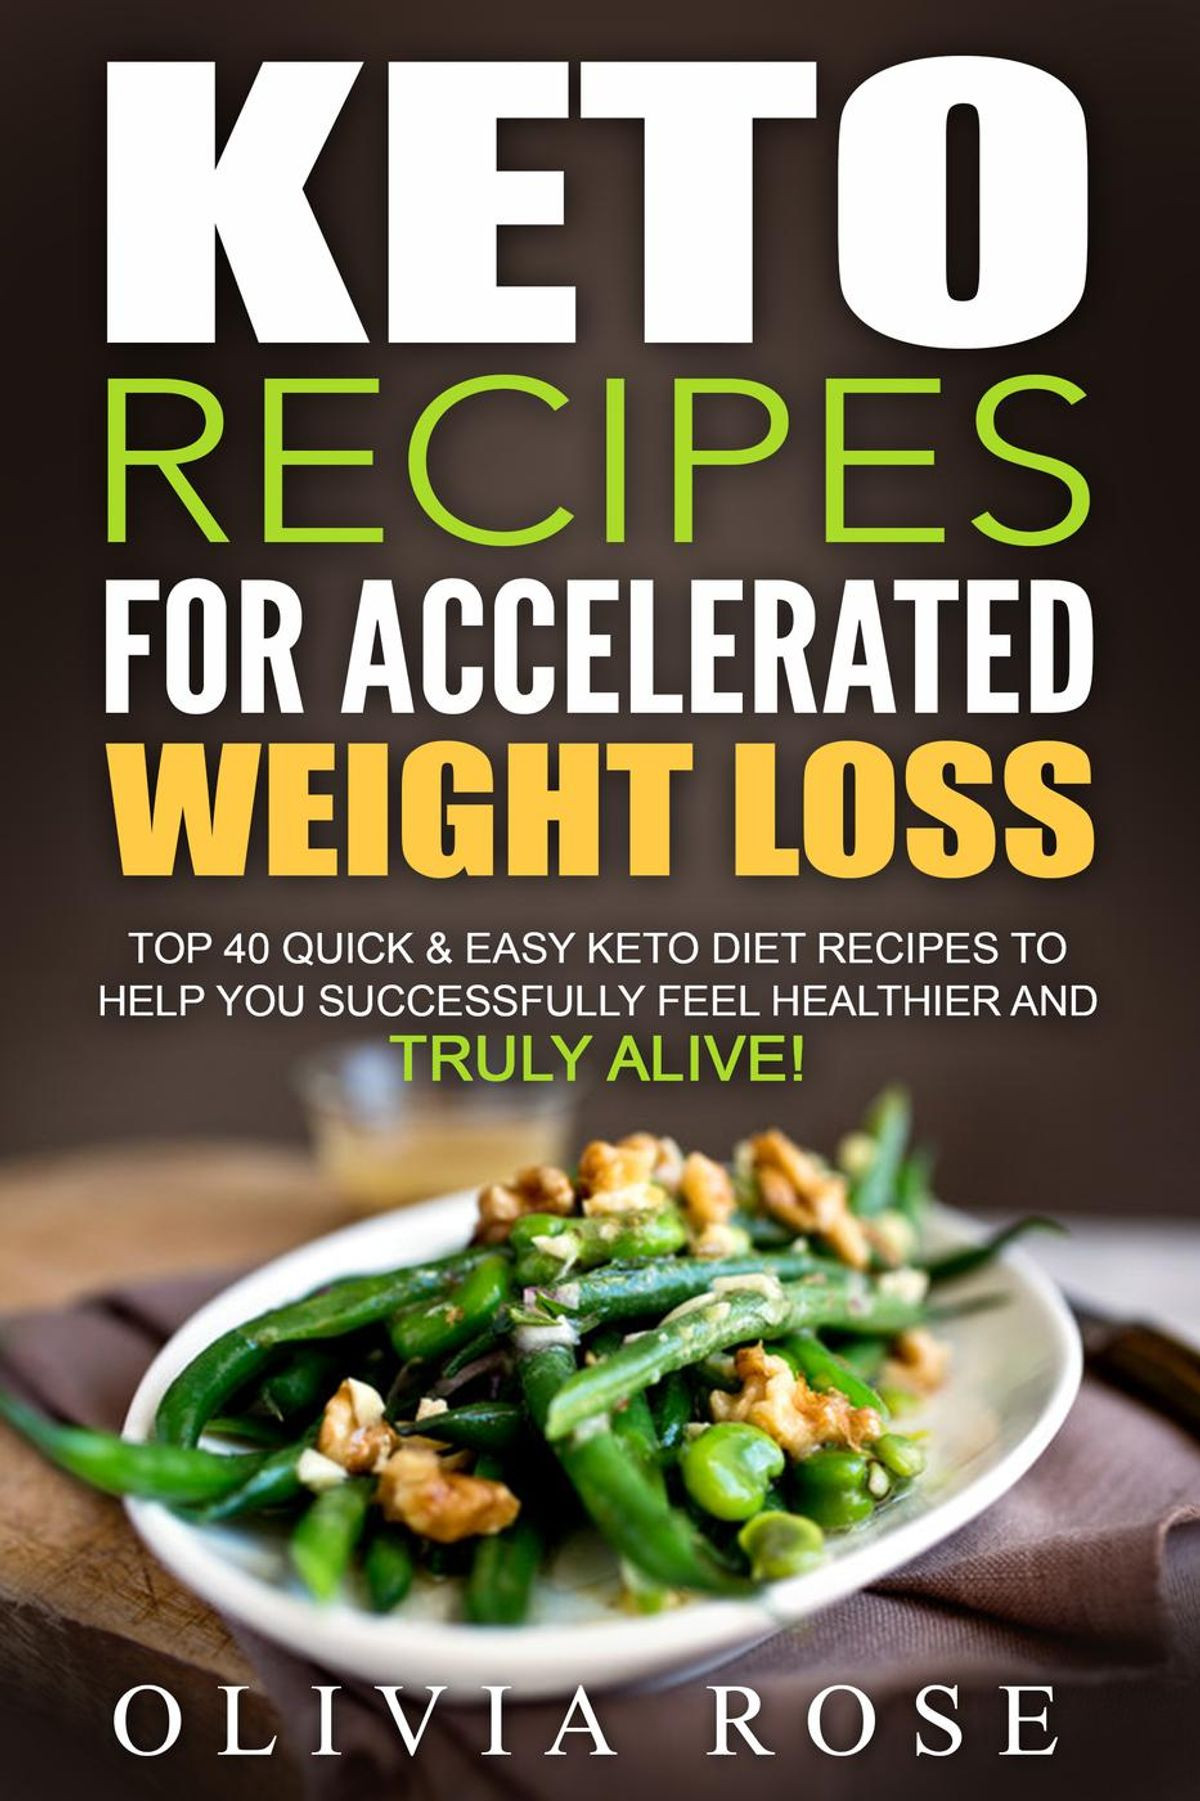 Easy Weight Loss Recipes
 Keto Recipes for Accelerated Weight Loss Top 40 Quick